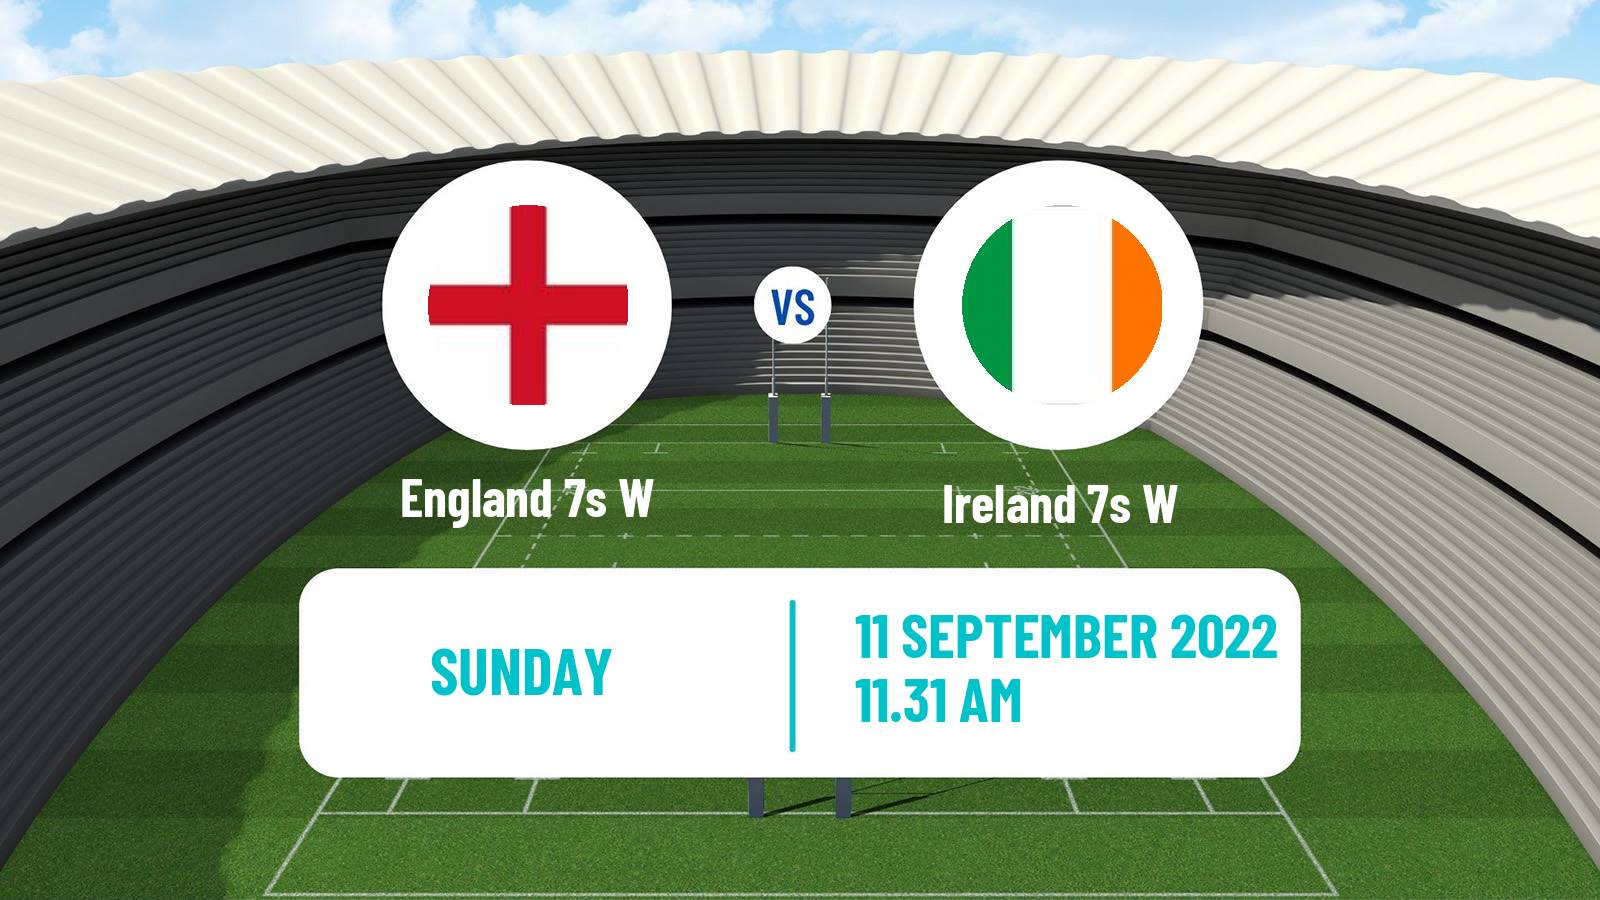 Rugby union Sevens World Cup Women England 7s W - Ireland 7s W